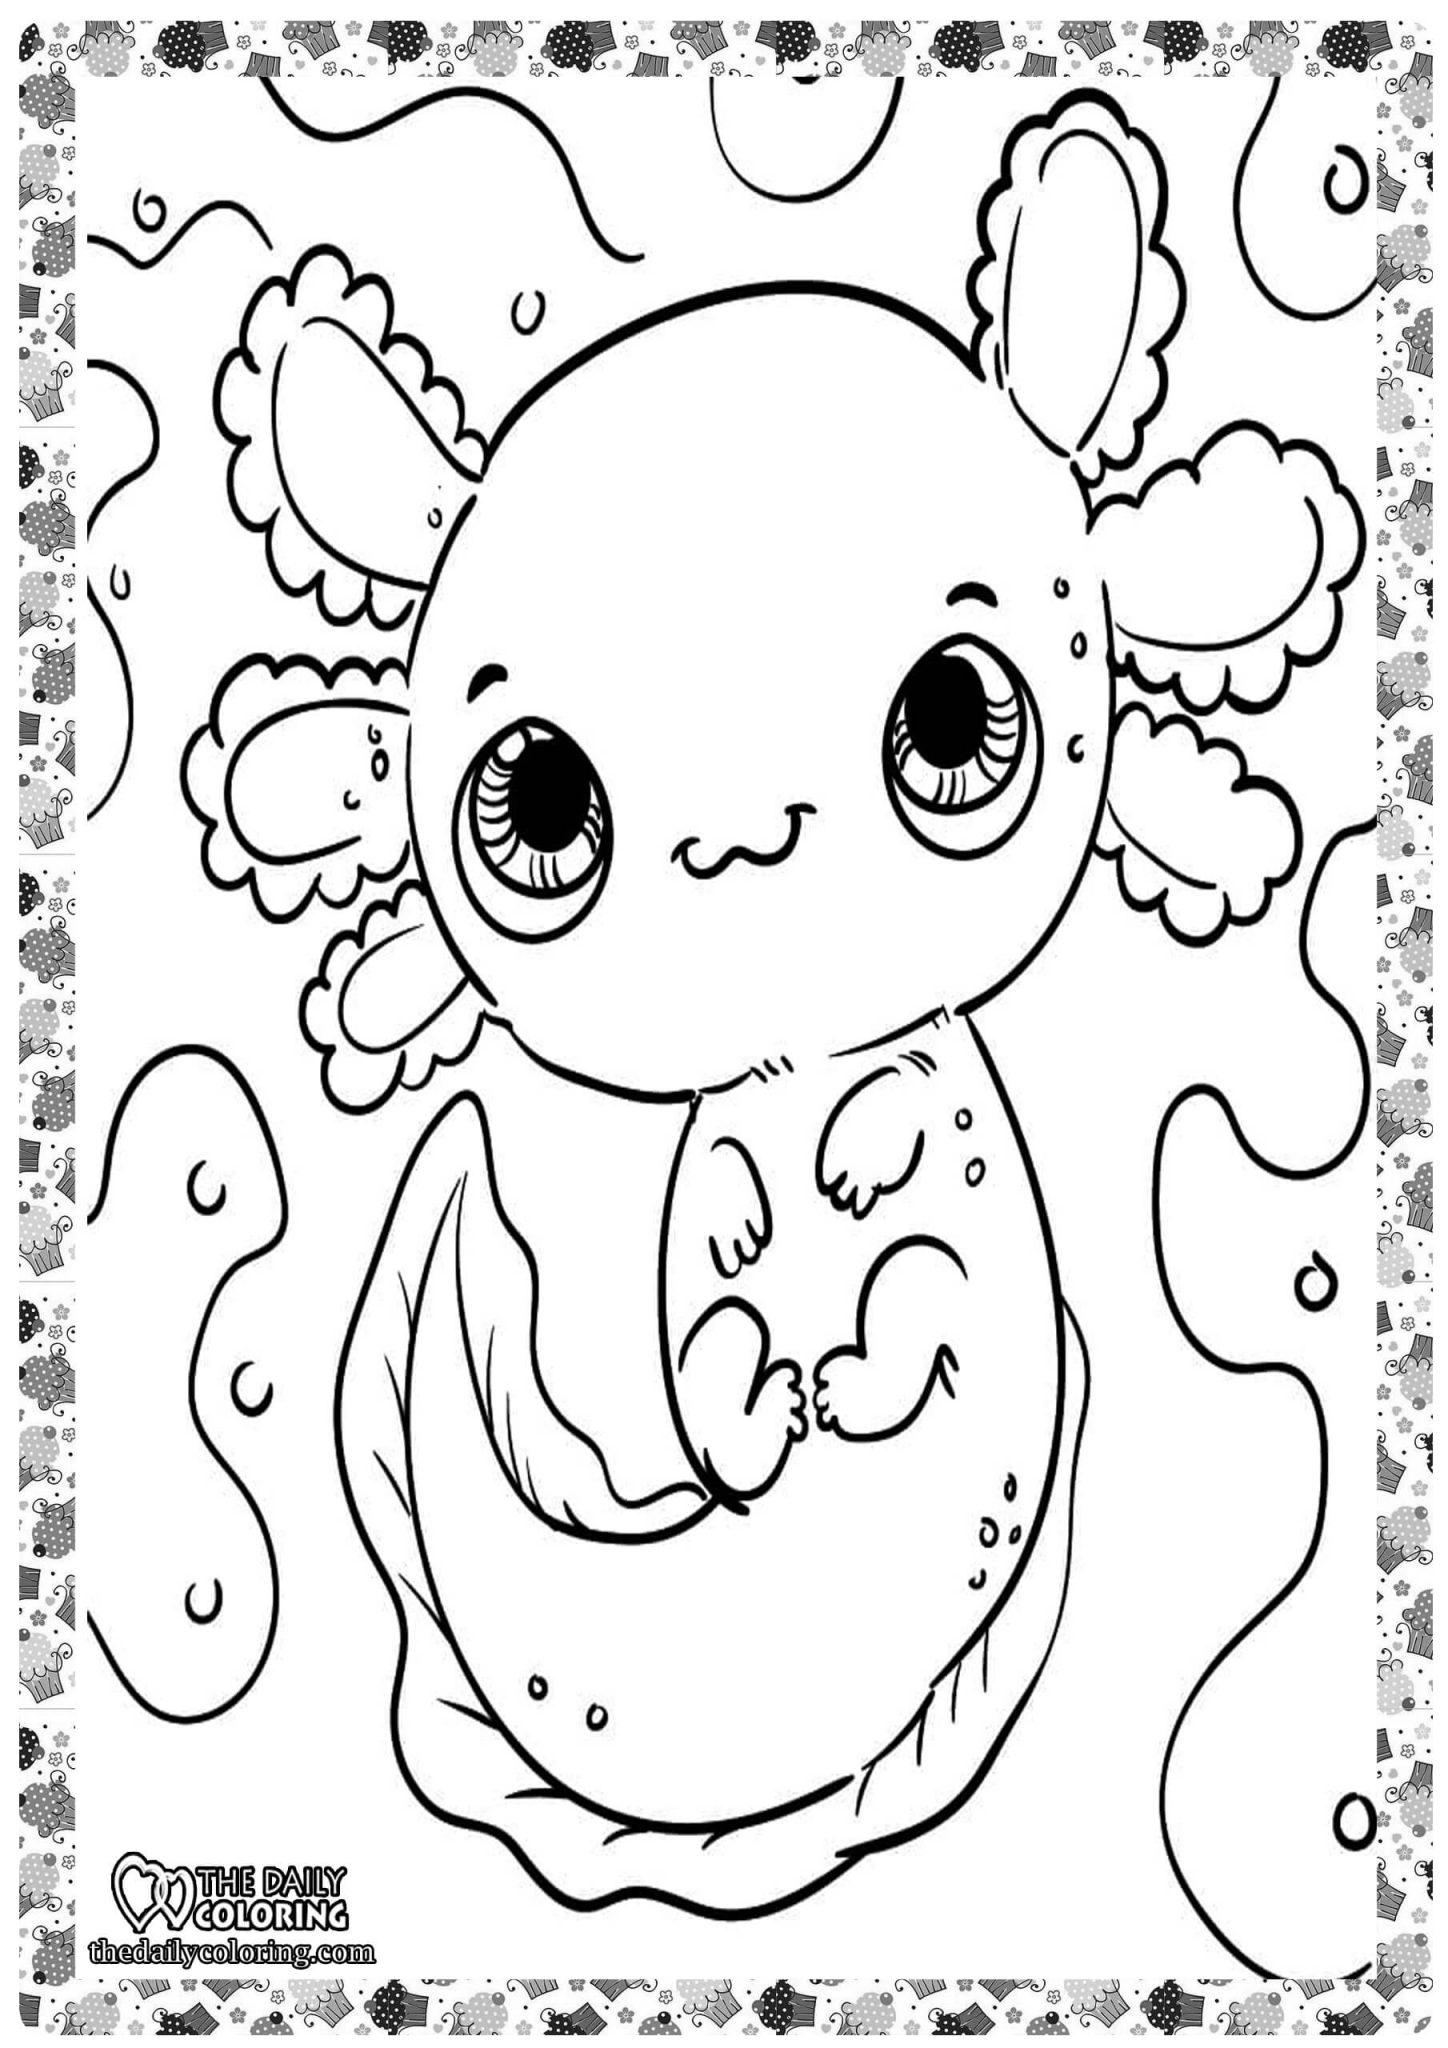 axolotl-coloring-pages-the-daily-coloring